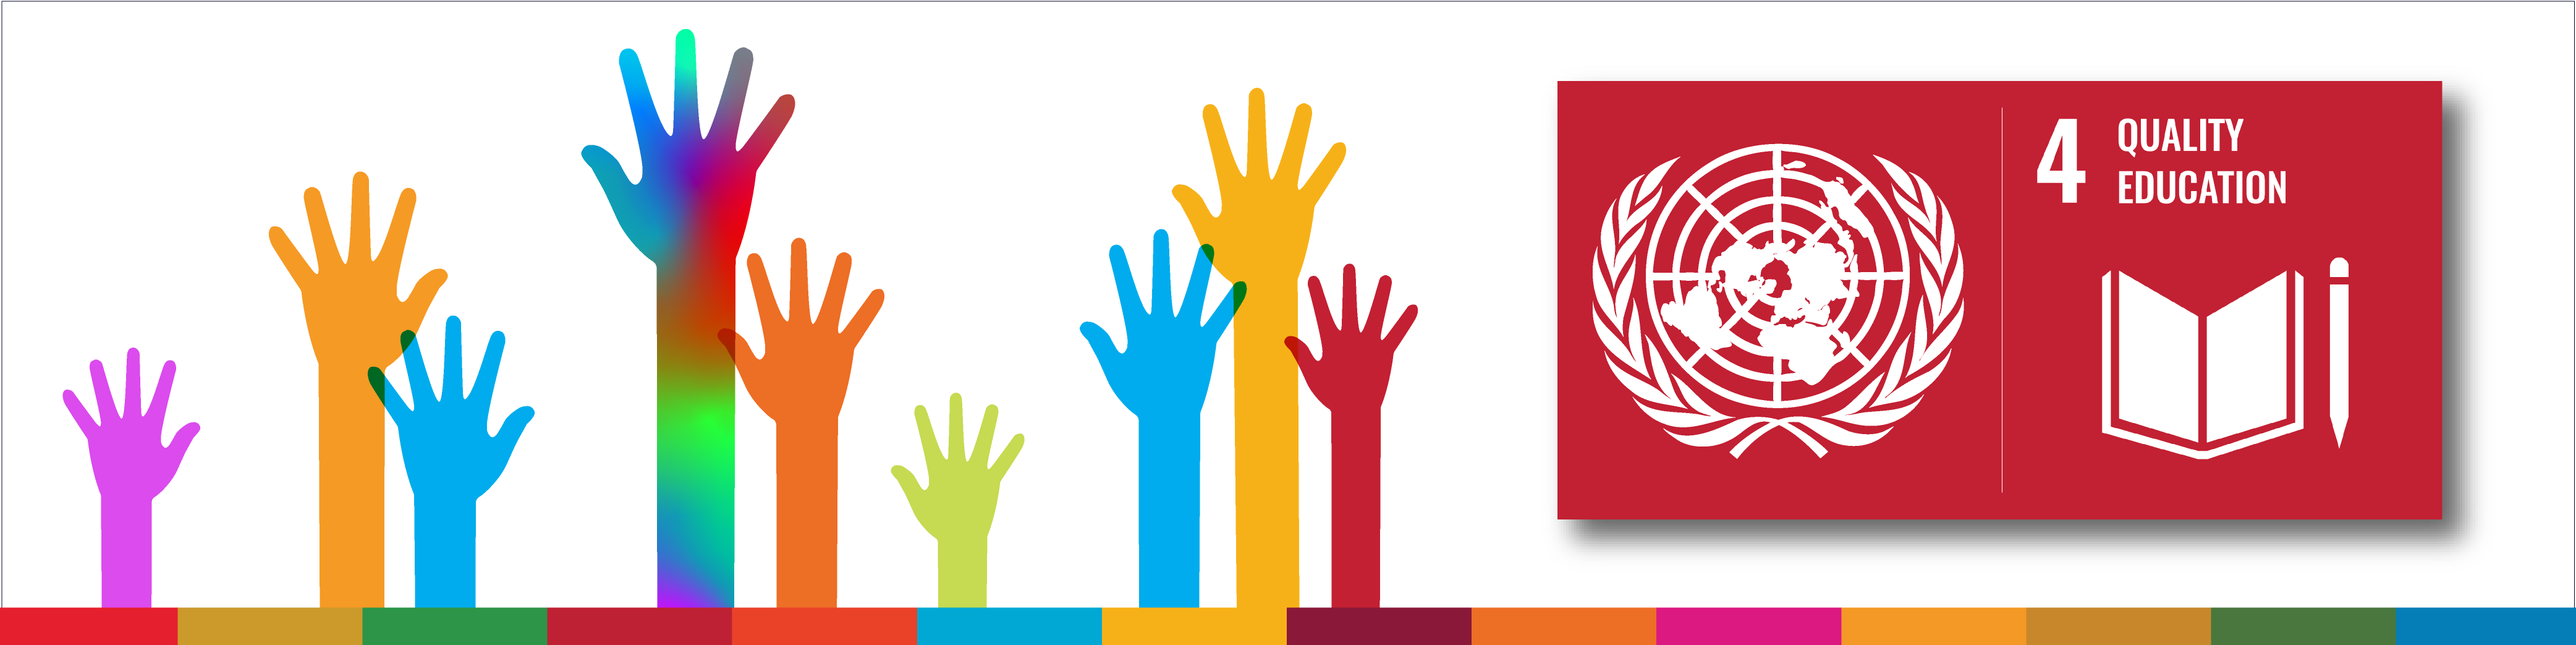 multicolored raised hands and SDG 4 logo